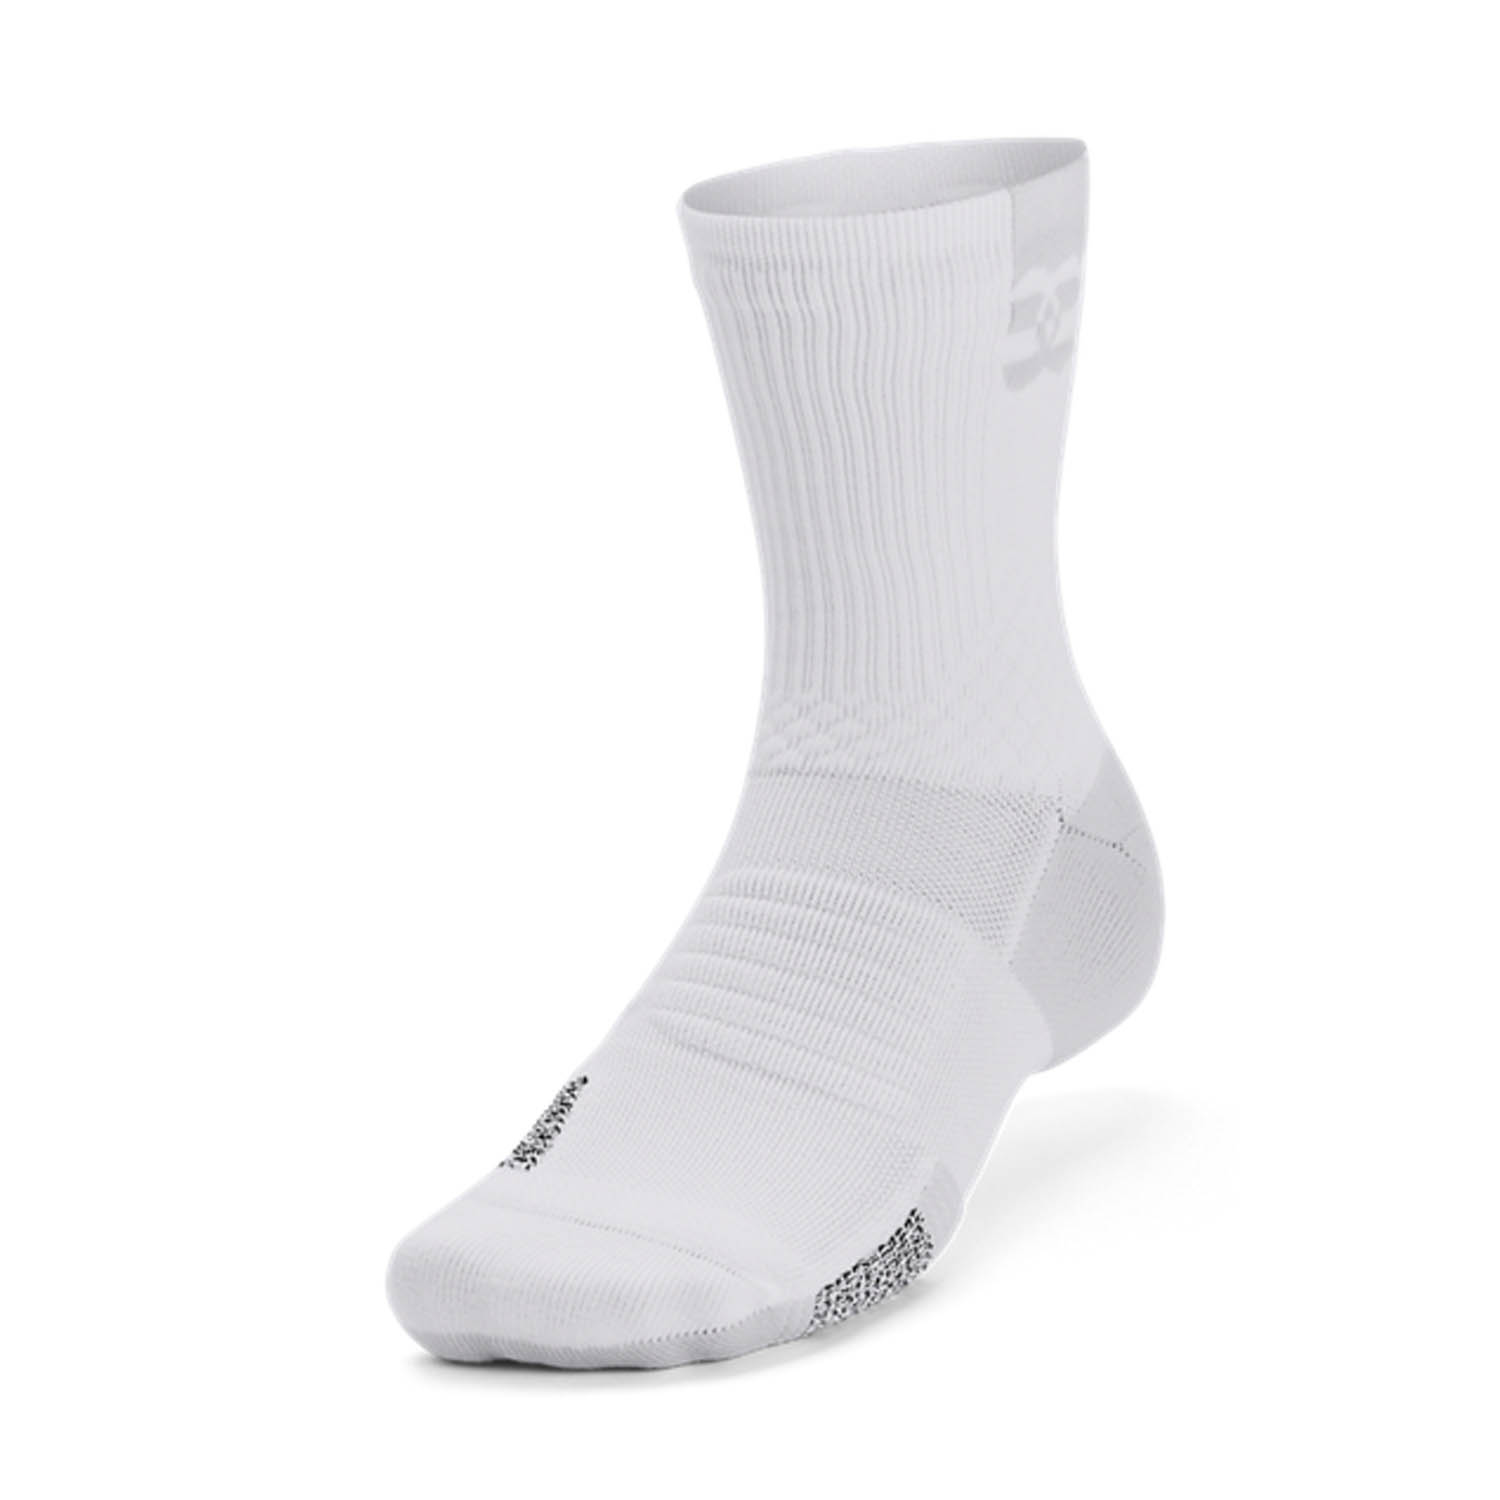 Under Armour ArmourDry Playmaker Socks - White/Halo Gray